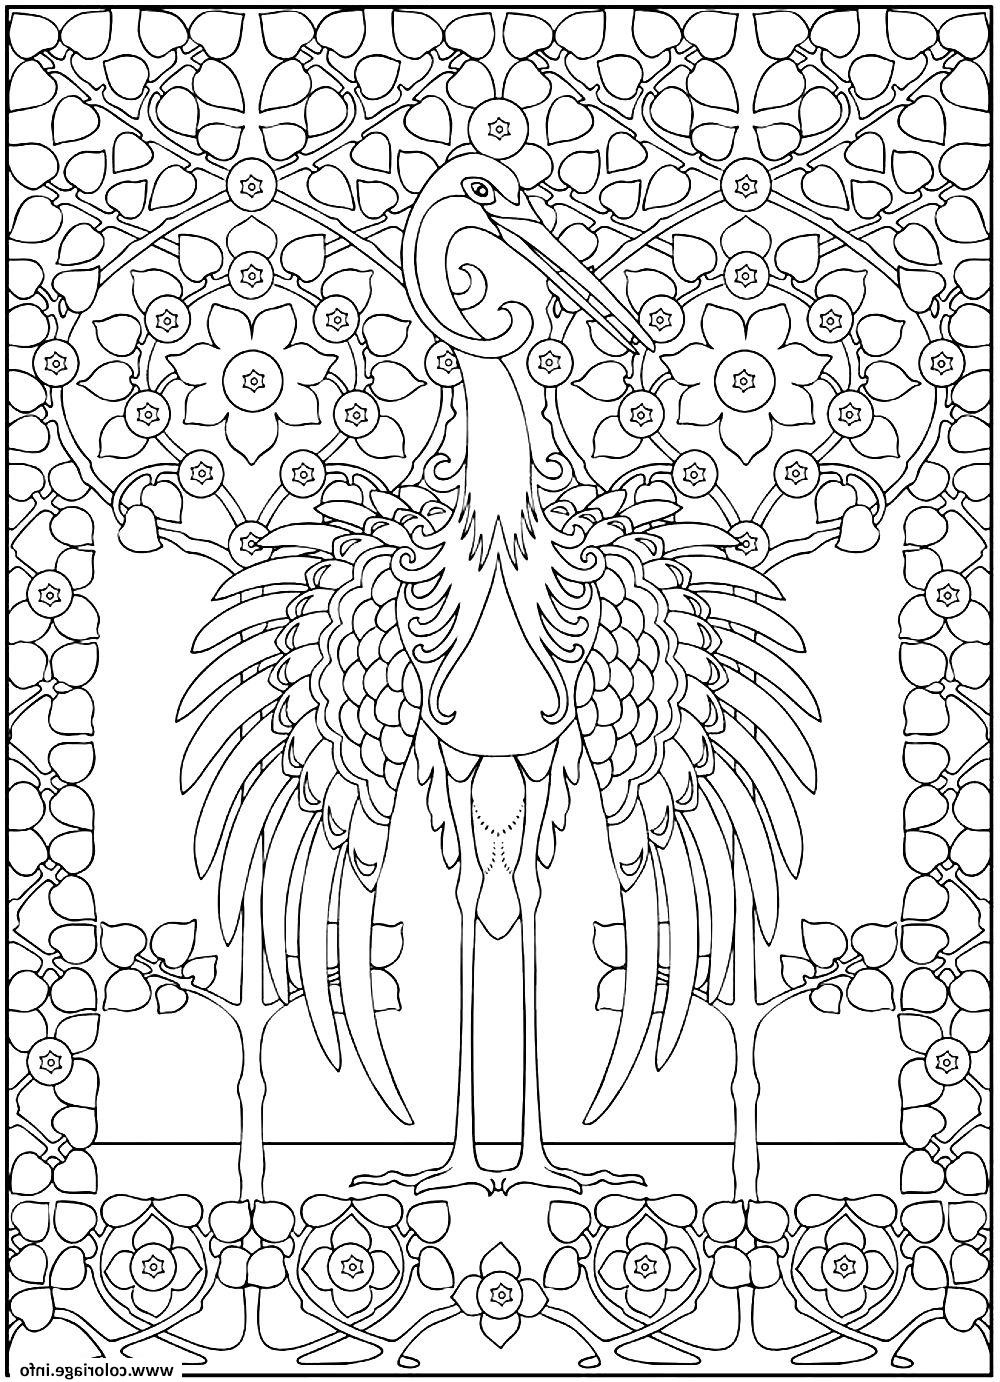 Dessin Grand Luxe Collection Coloriage Adulte Grand Heron Majestueux Jecolorie